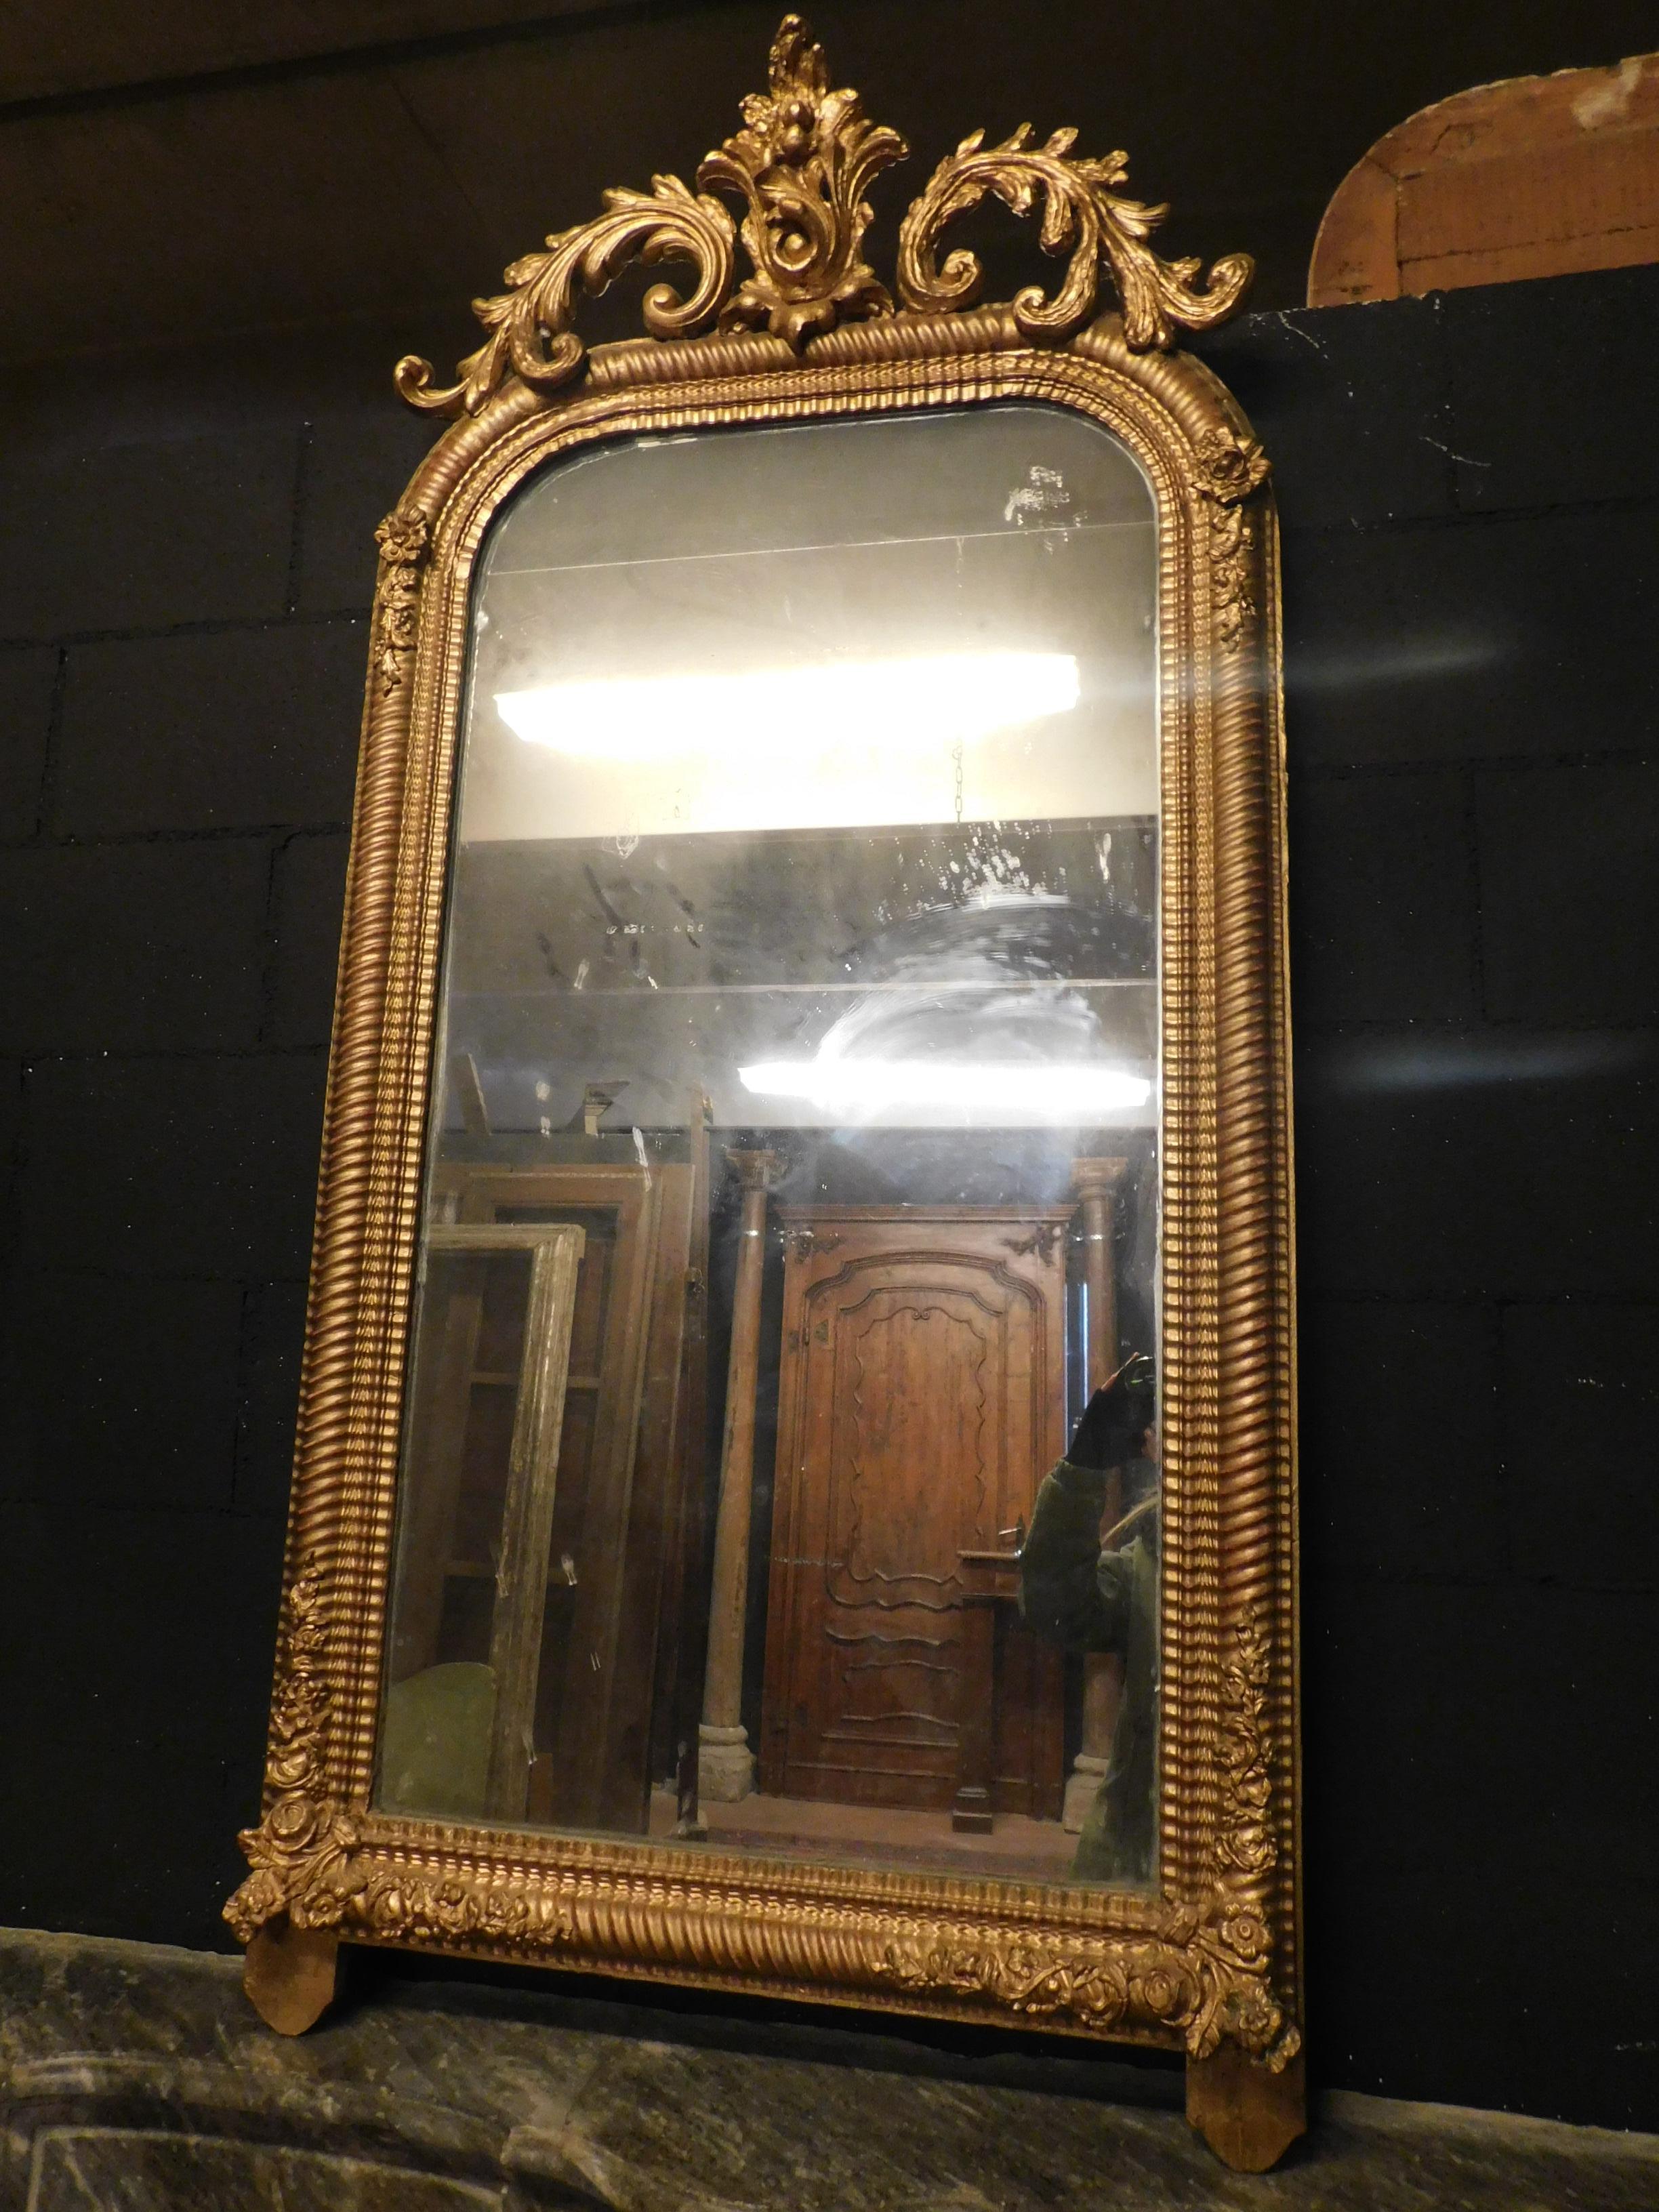 Ancient mirror with carved and gilded rib, handmade with leaves and frames, with feet typical of the mirrors that went over the fireplaces or important chest of drawers furniture, from the 19th century from Italy
maximum size: cm 150 H x 75 W.